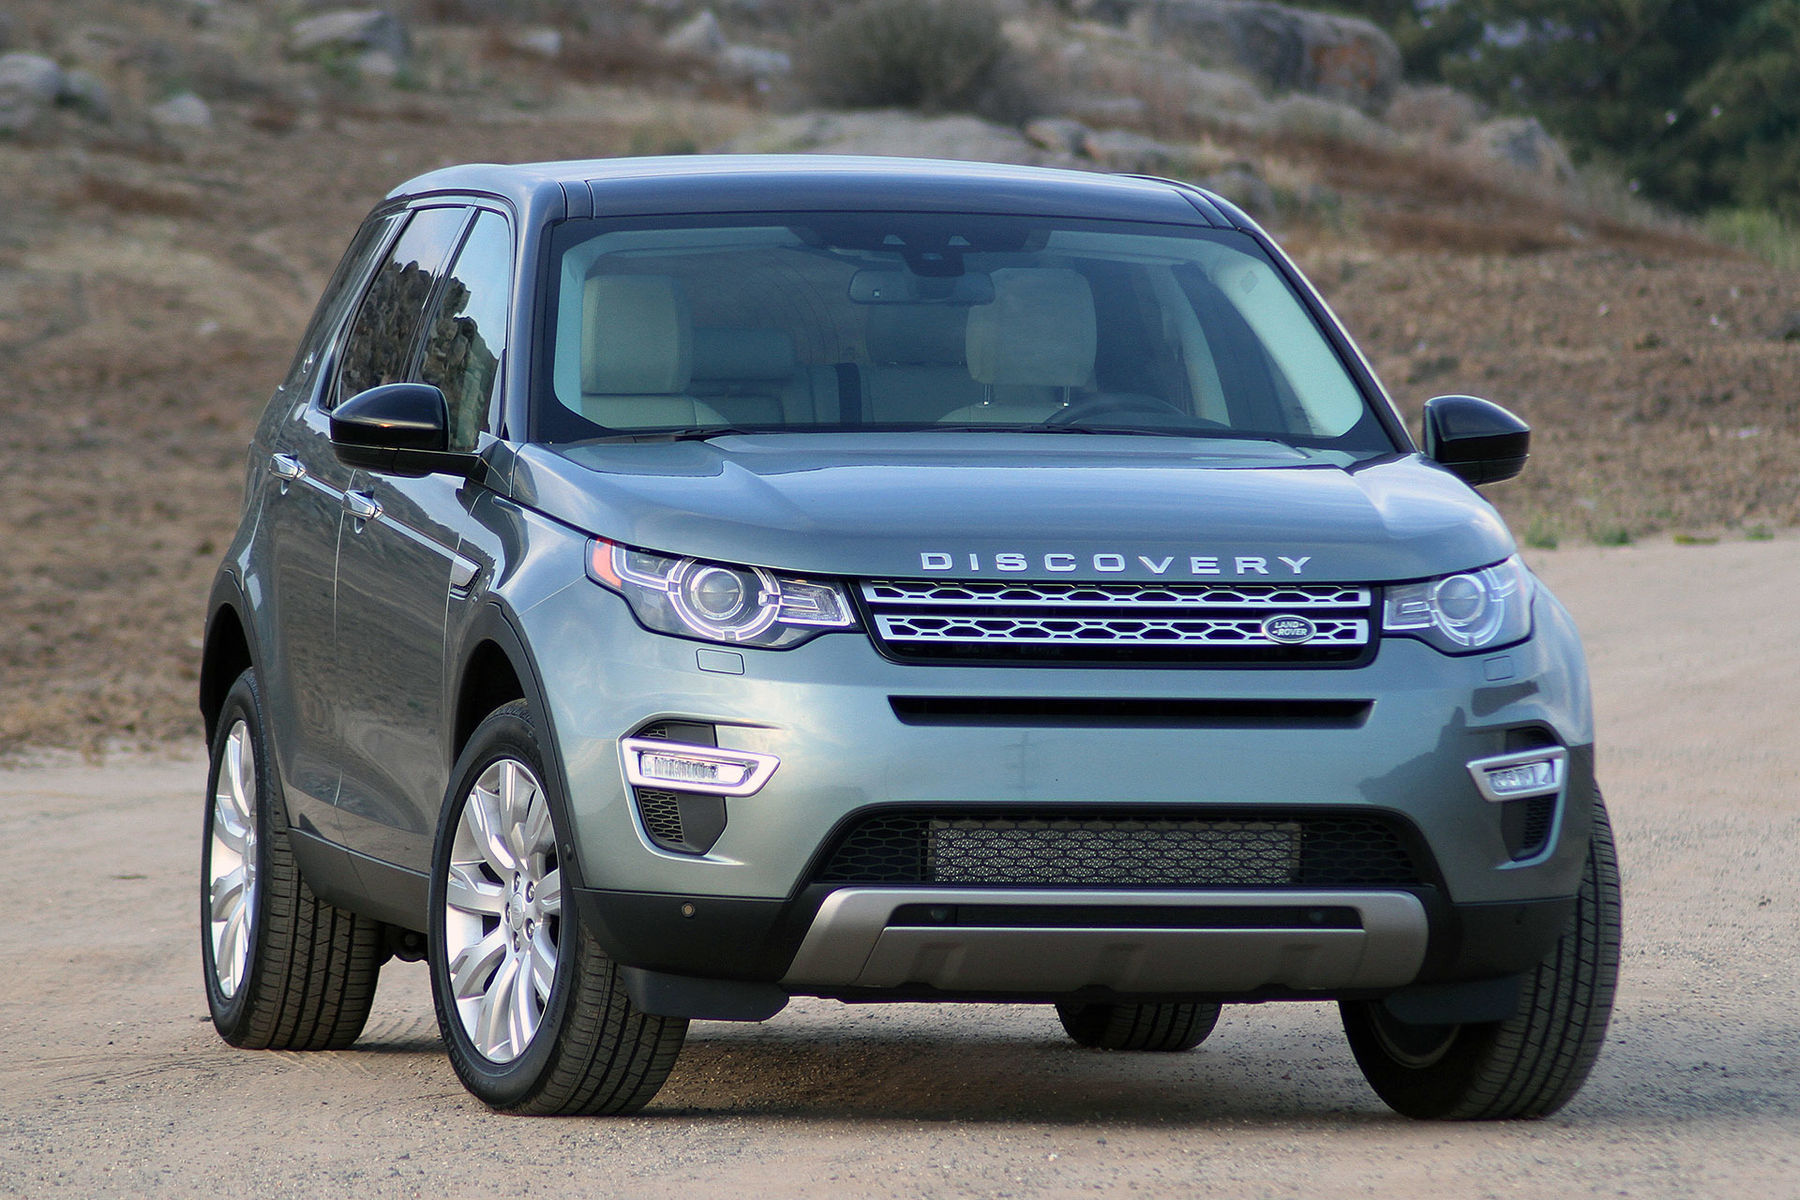 Land rover sport 2015. Ленд Ровер Дискавери 2015. Ленд Ровер Дискавери спорт 2015. Ленд Ровер спорт 2015. Range Rover Discovery Sport 2022.